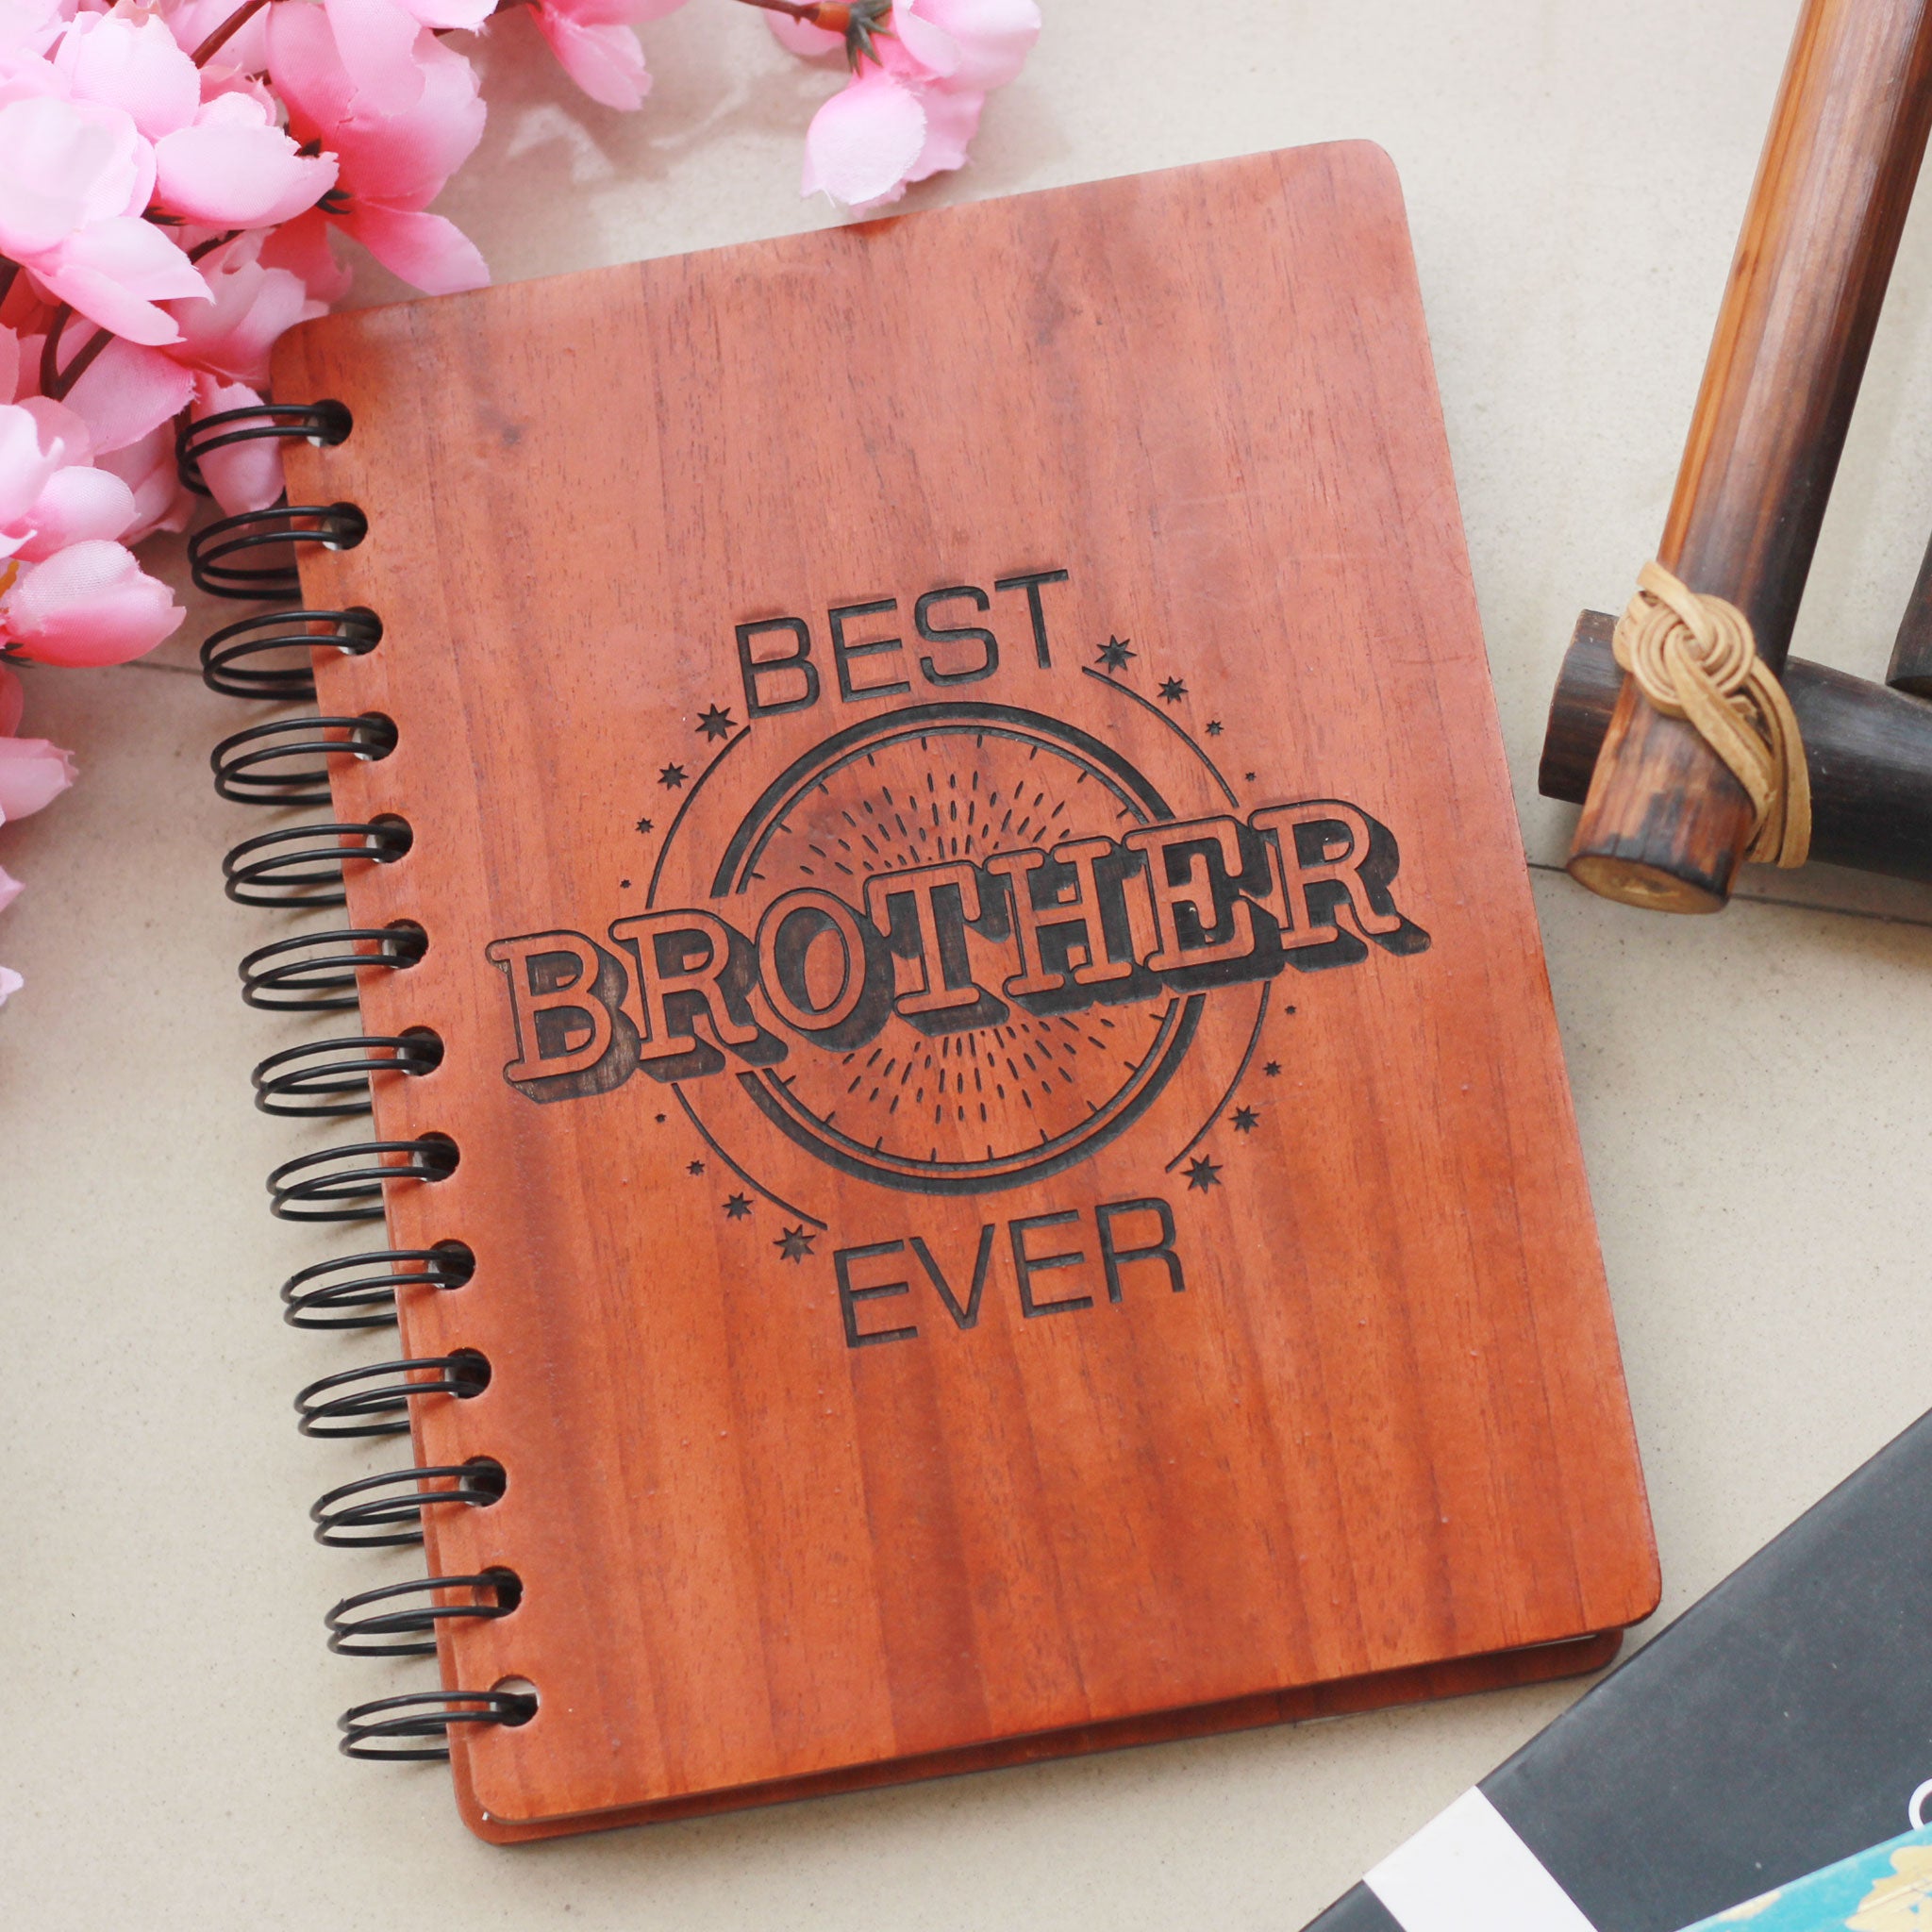 Personalized Wooden Notebook For The Best Brother Ever. This Writer's Journal Makes A Fun Rakhi Gift For Brother. Buy More Raksha Bandhan Gifts For Him From The Woodgeek Store.